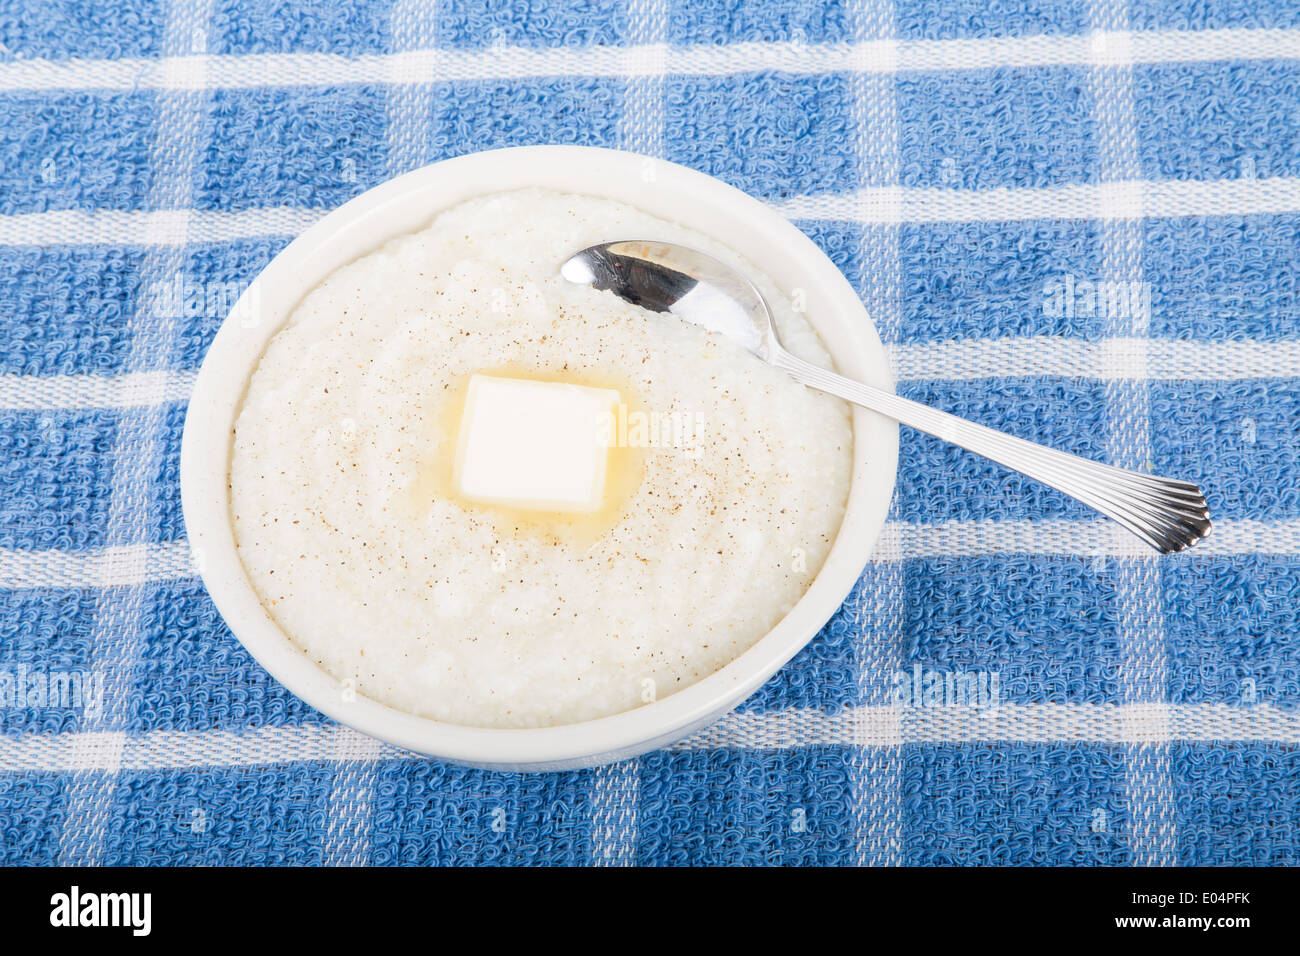 A bowl of fresh, hot grits with a spoon Stock Photo